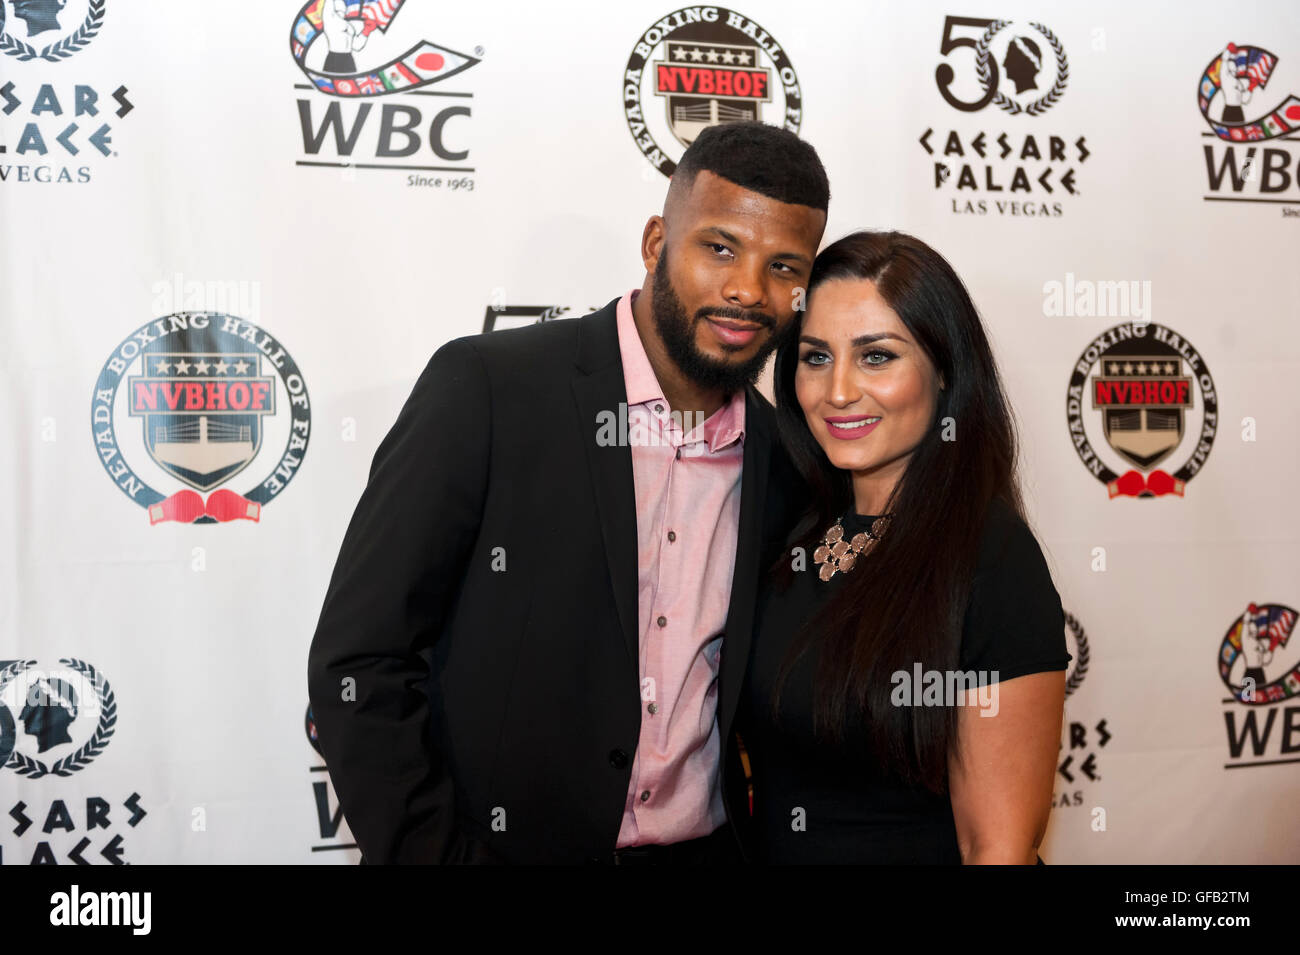 Caesars Palace, Las Vegas, Nevada, USA. 30th July, 2016. Badou Jack on the red carpet at the 4th Annual Nevada Boxing Hall of Fame Induction Ceremony Credit:  Ken Howard/Alamy Live News Stock Photo